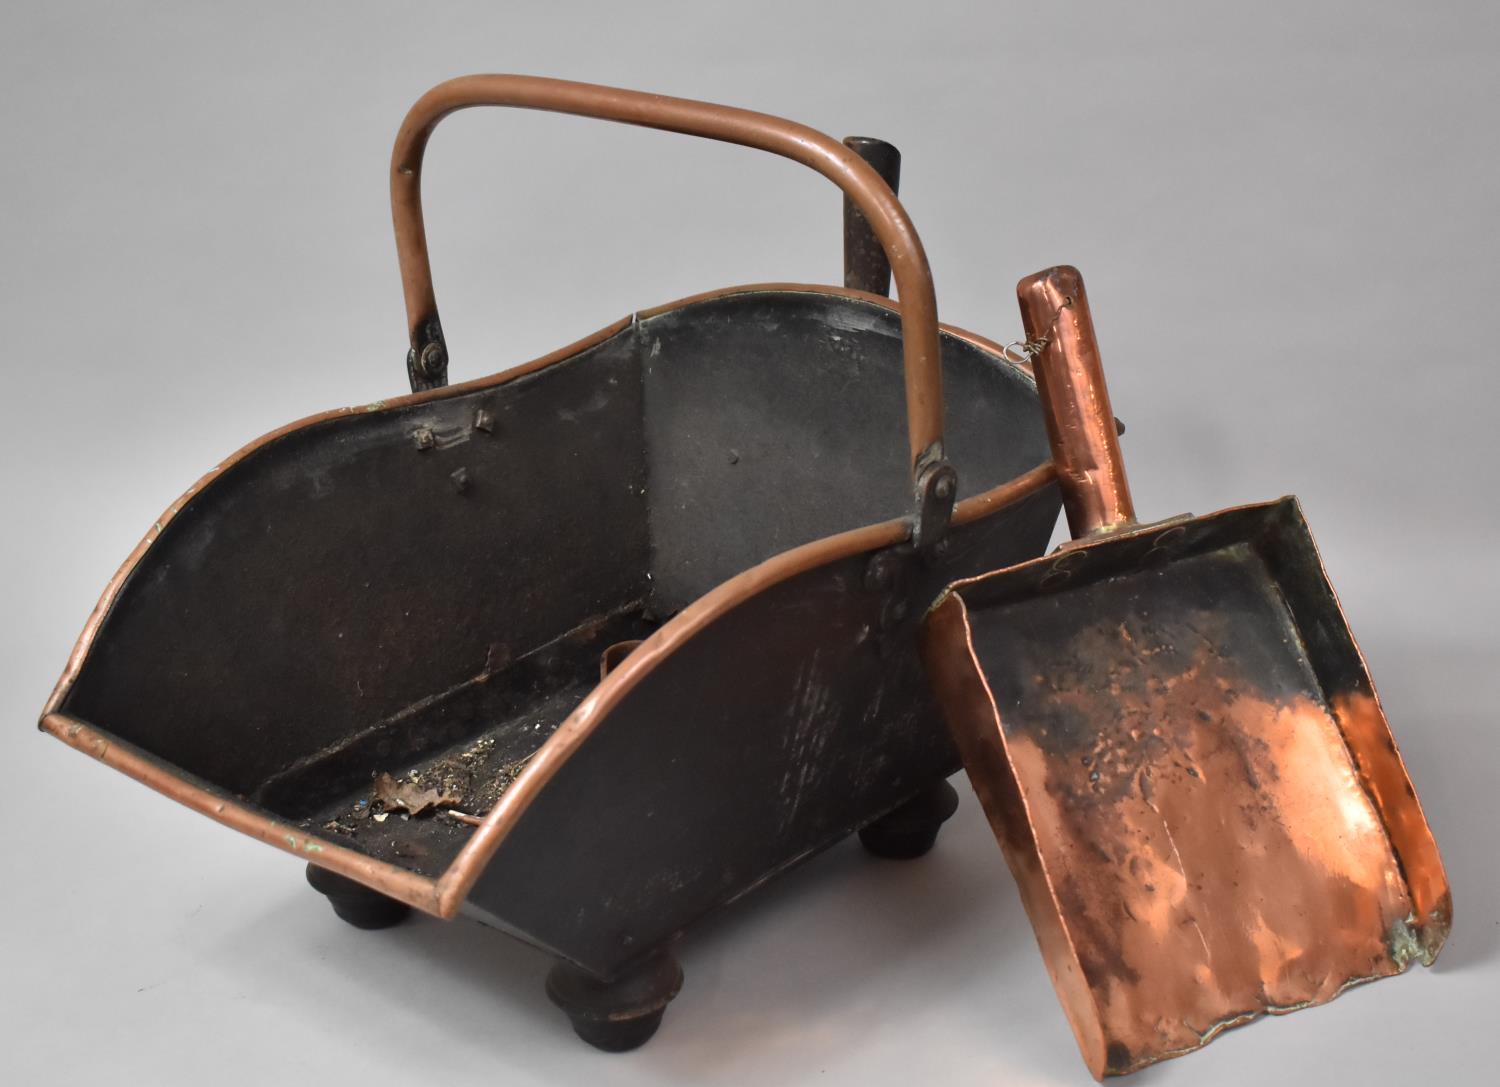 A Late 19th/Early 20th Century Copper Coal Scuttle with Heavy Copper Shovel, 43cm Long